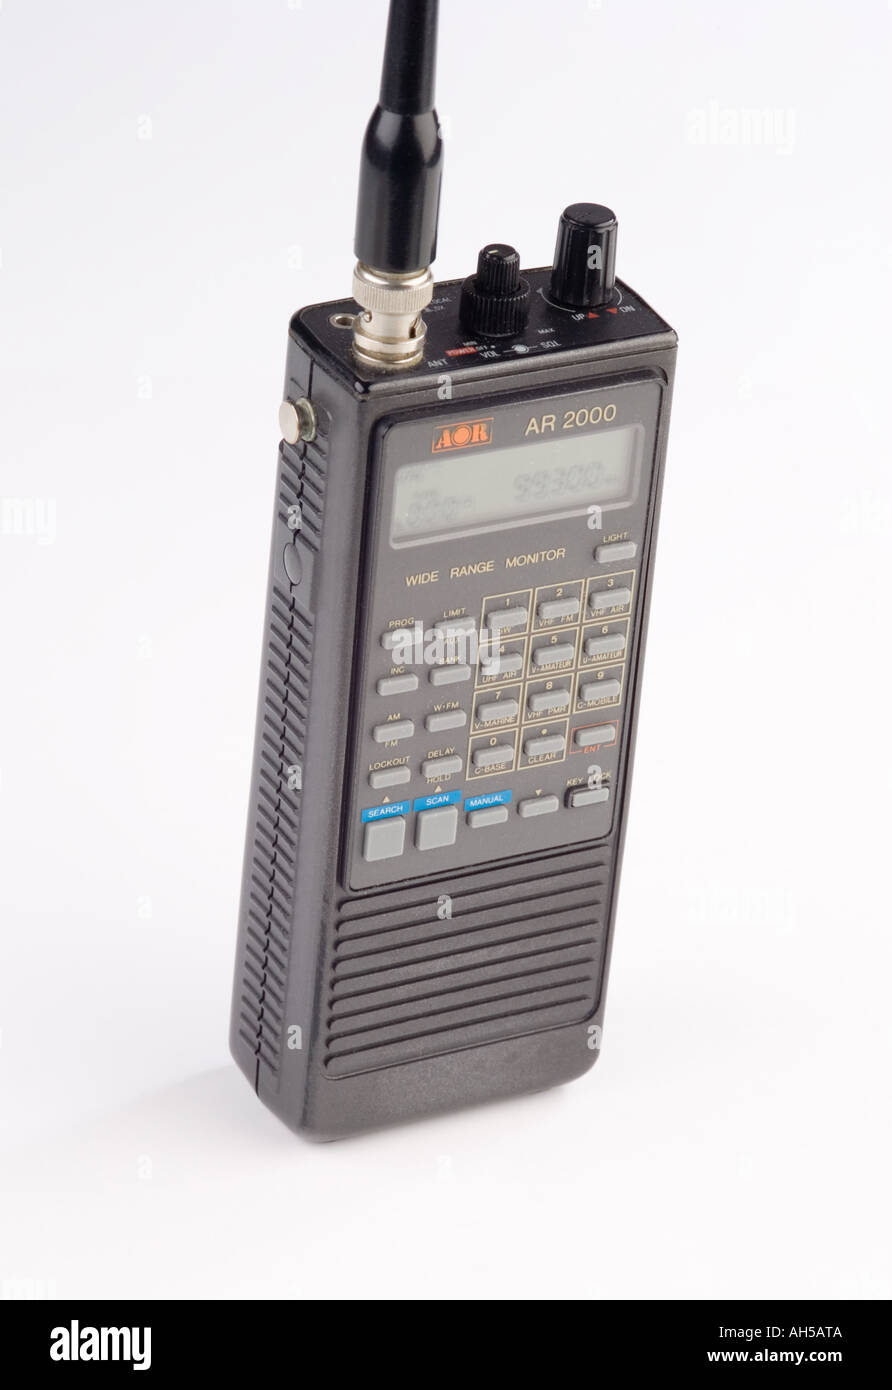 A wideband radio scanner that can receive signals from a vast range of transmissions Stock Photo